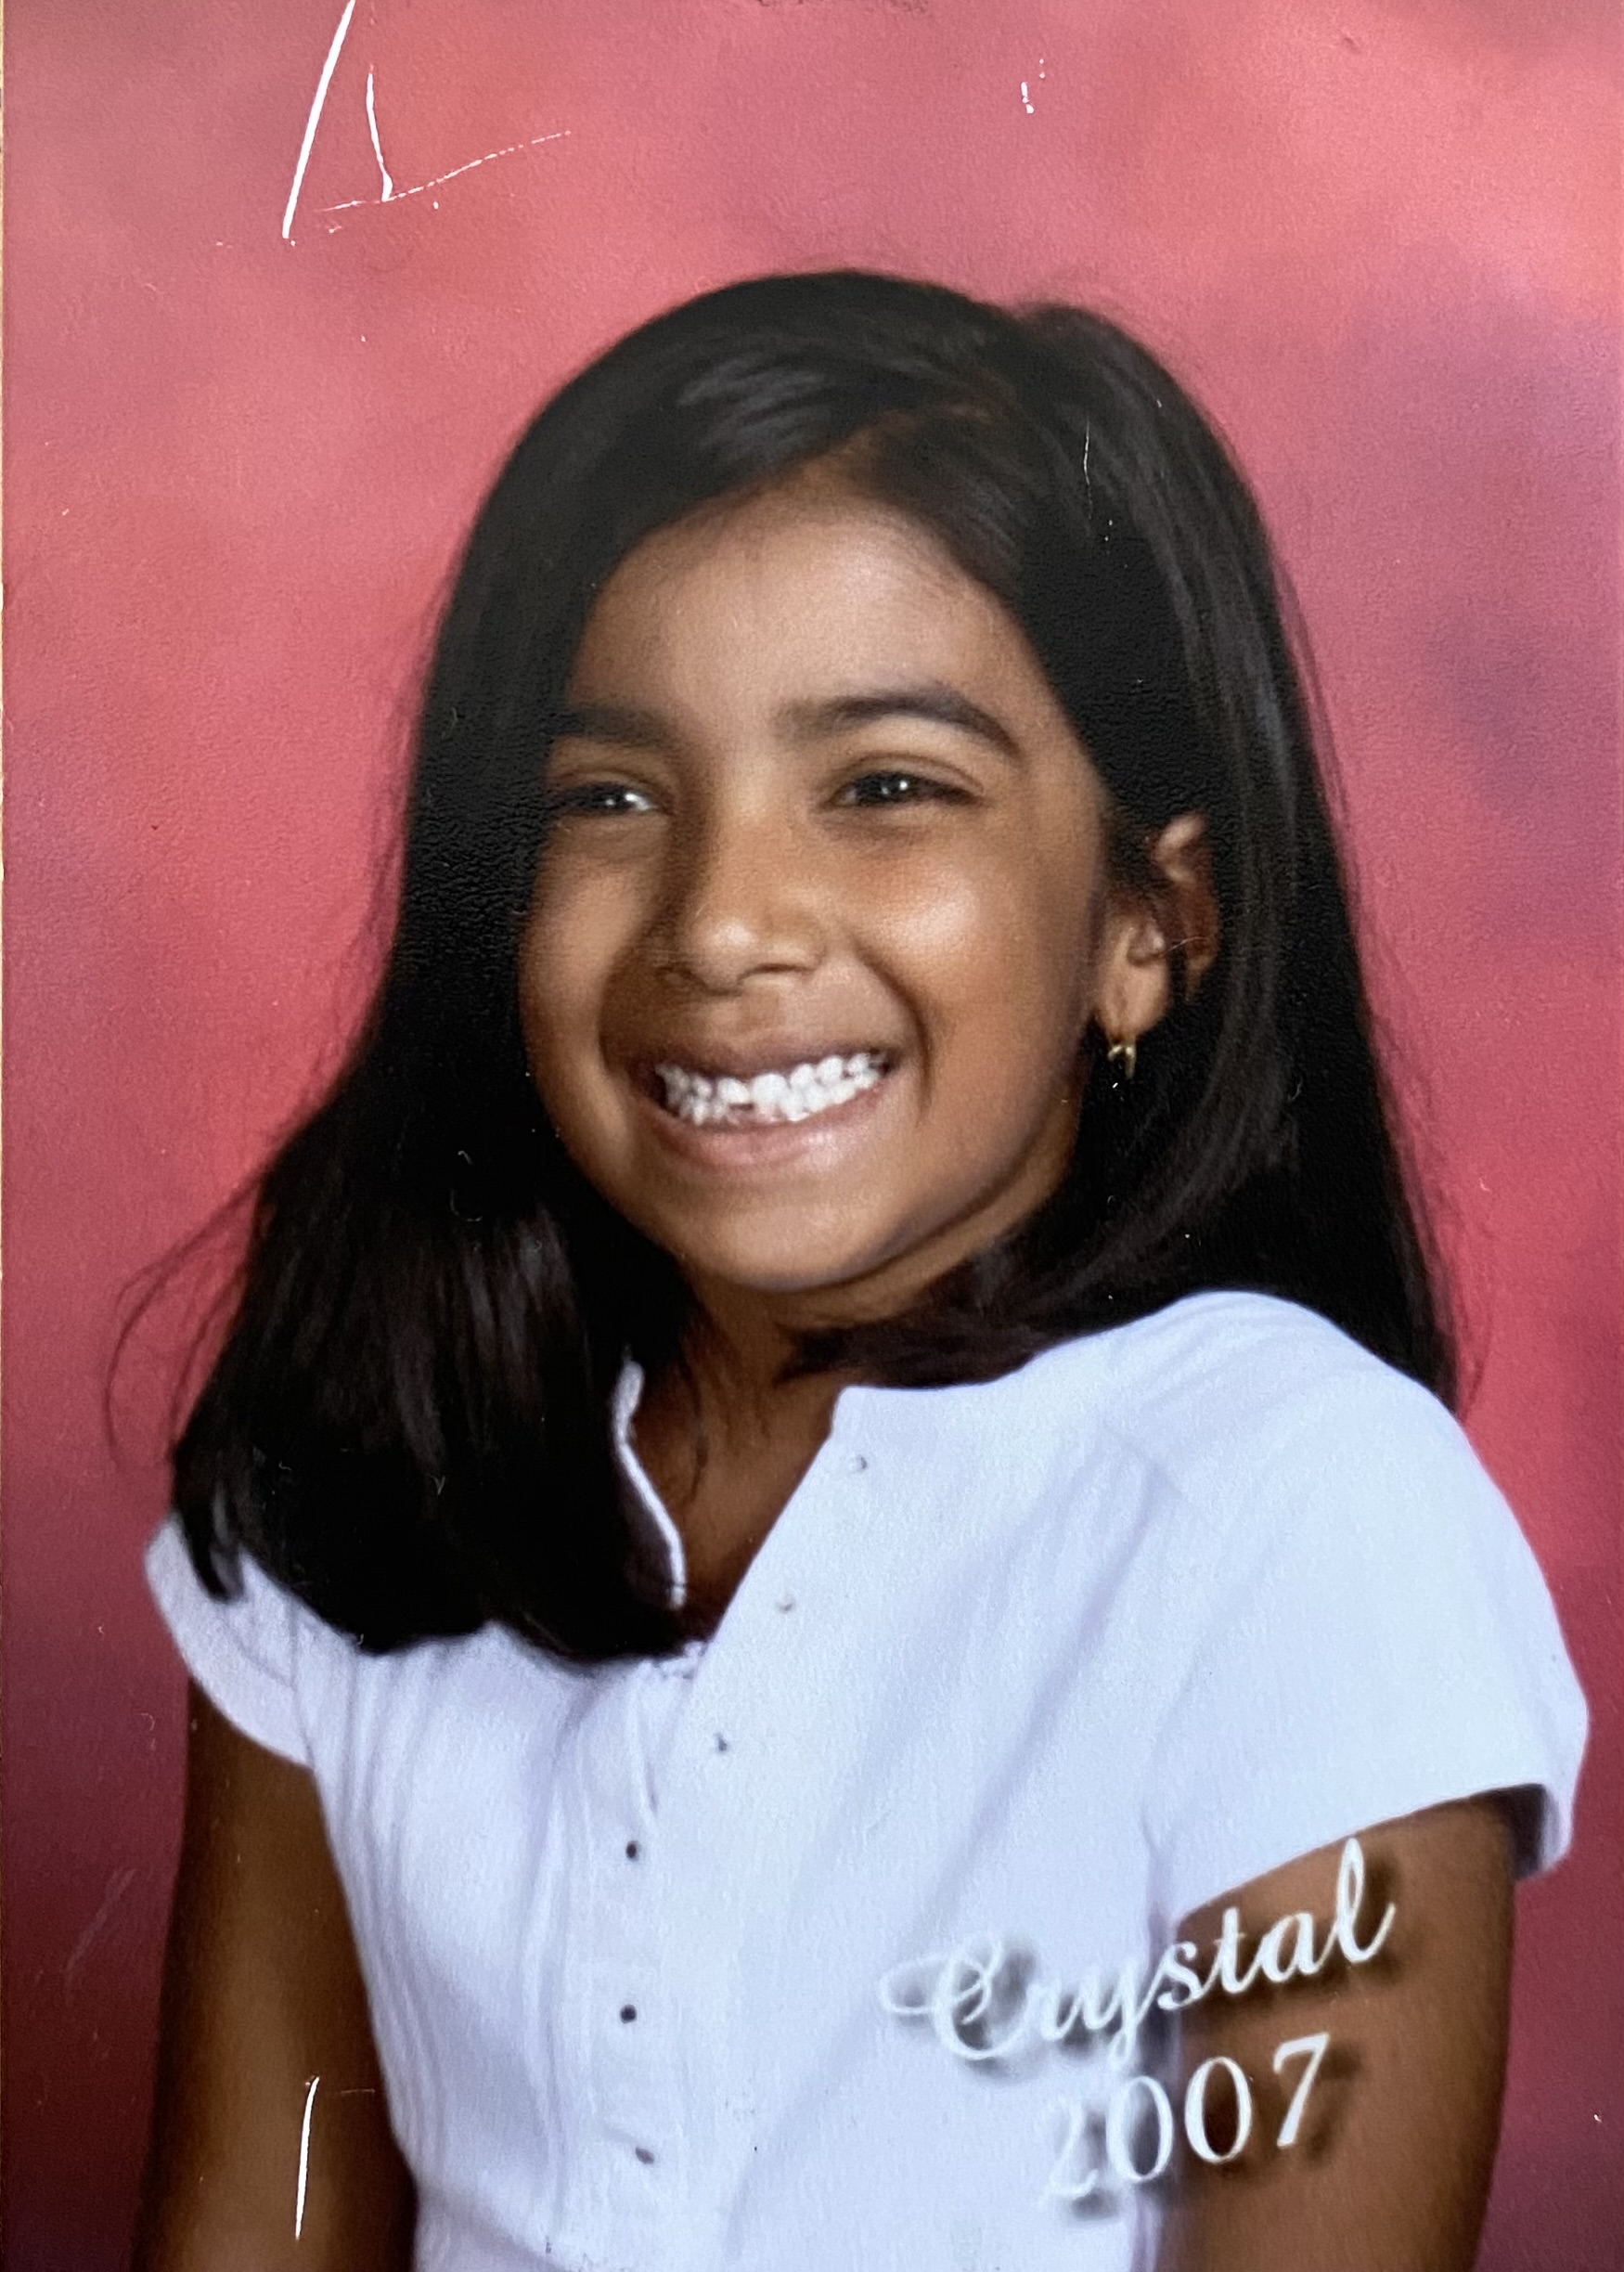 Crystal's school picture from elementary school